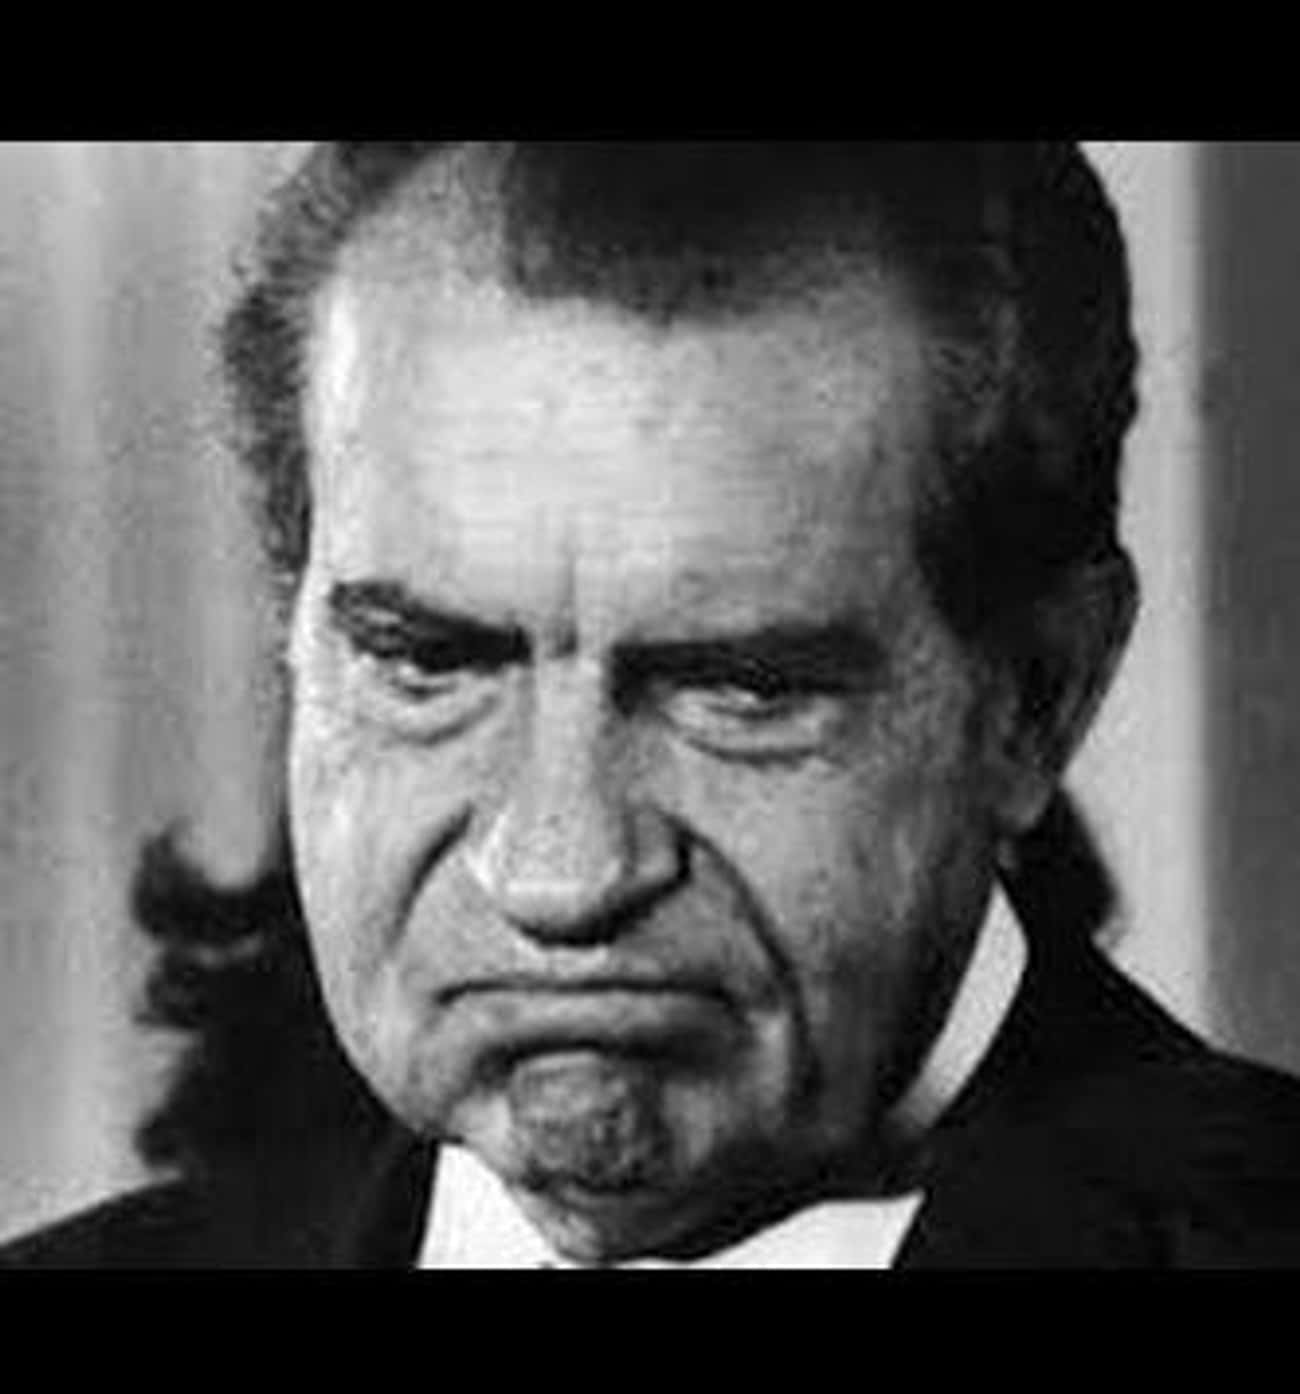 Nixon Would Often Fire People While Drunk, And Forget In The Morning